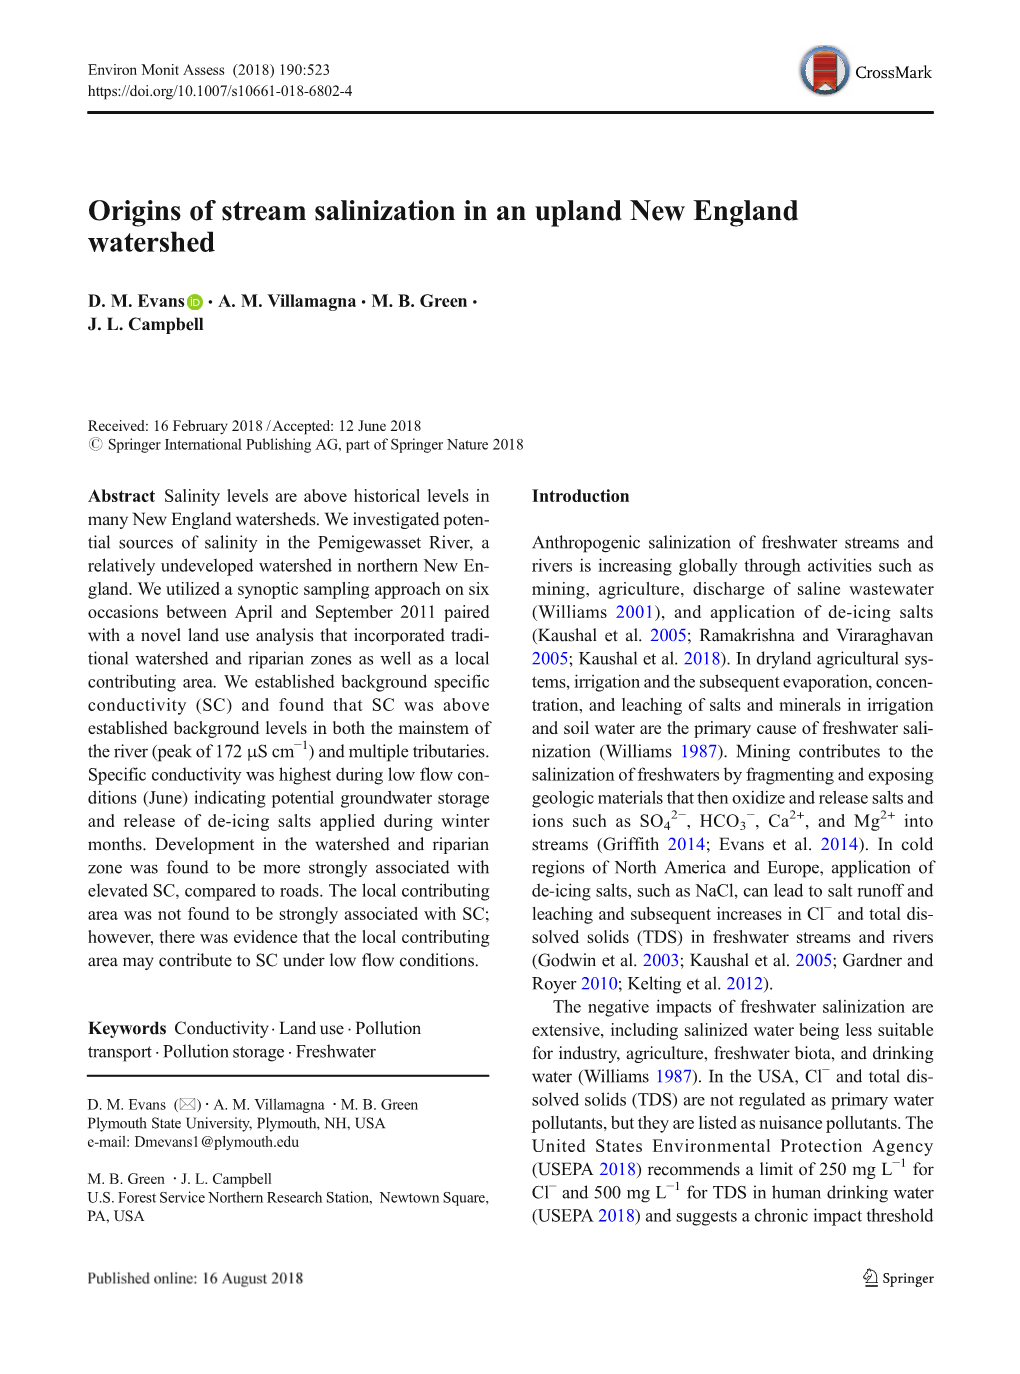 Origins of Stream Salinization in an Upland New England Watershed